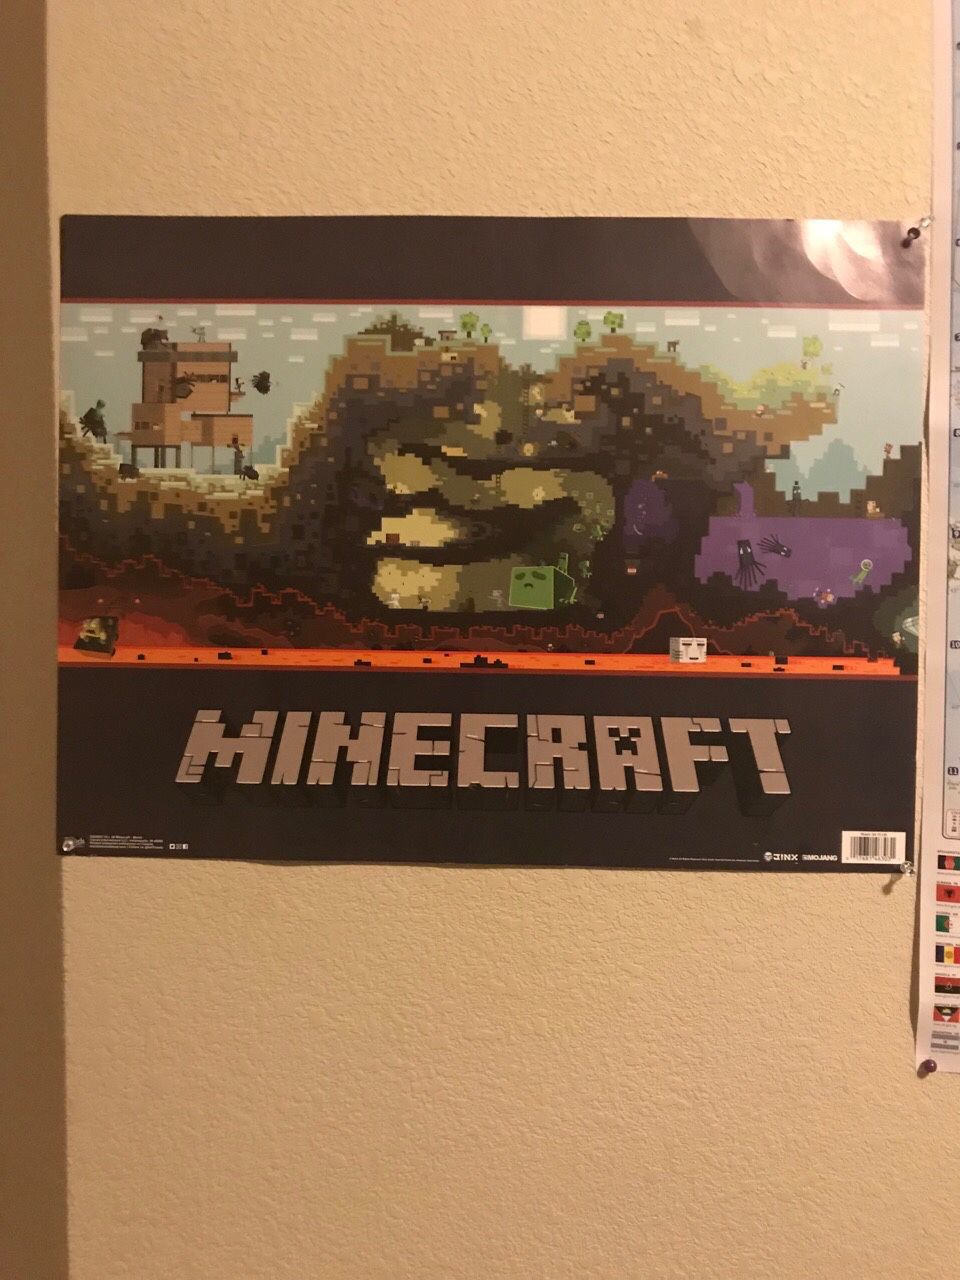 Mine craft, Portal, Attack on Titans, Anime Posters